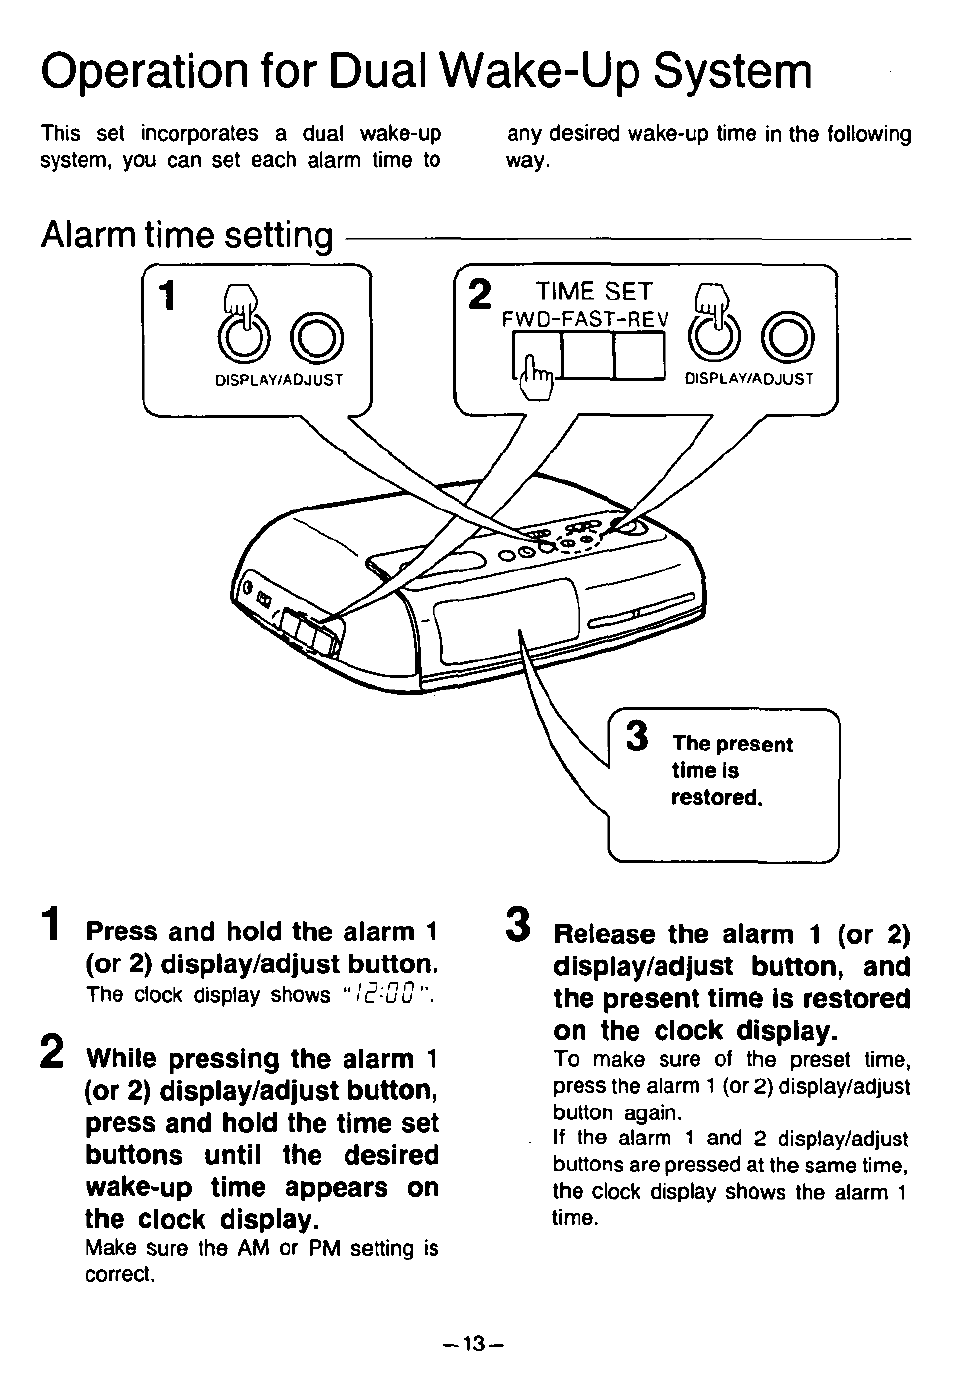 Operation for dual wake-up system, Alarm time setting | Panasonic RC6099 User Manual | Page 13 / 20